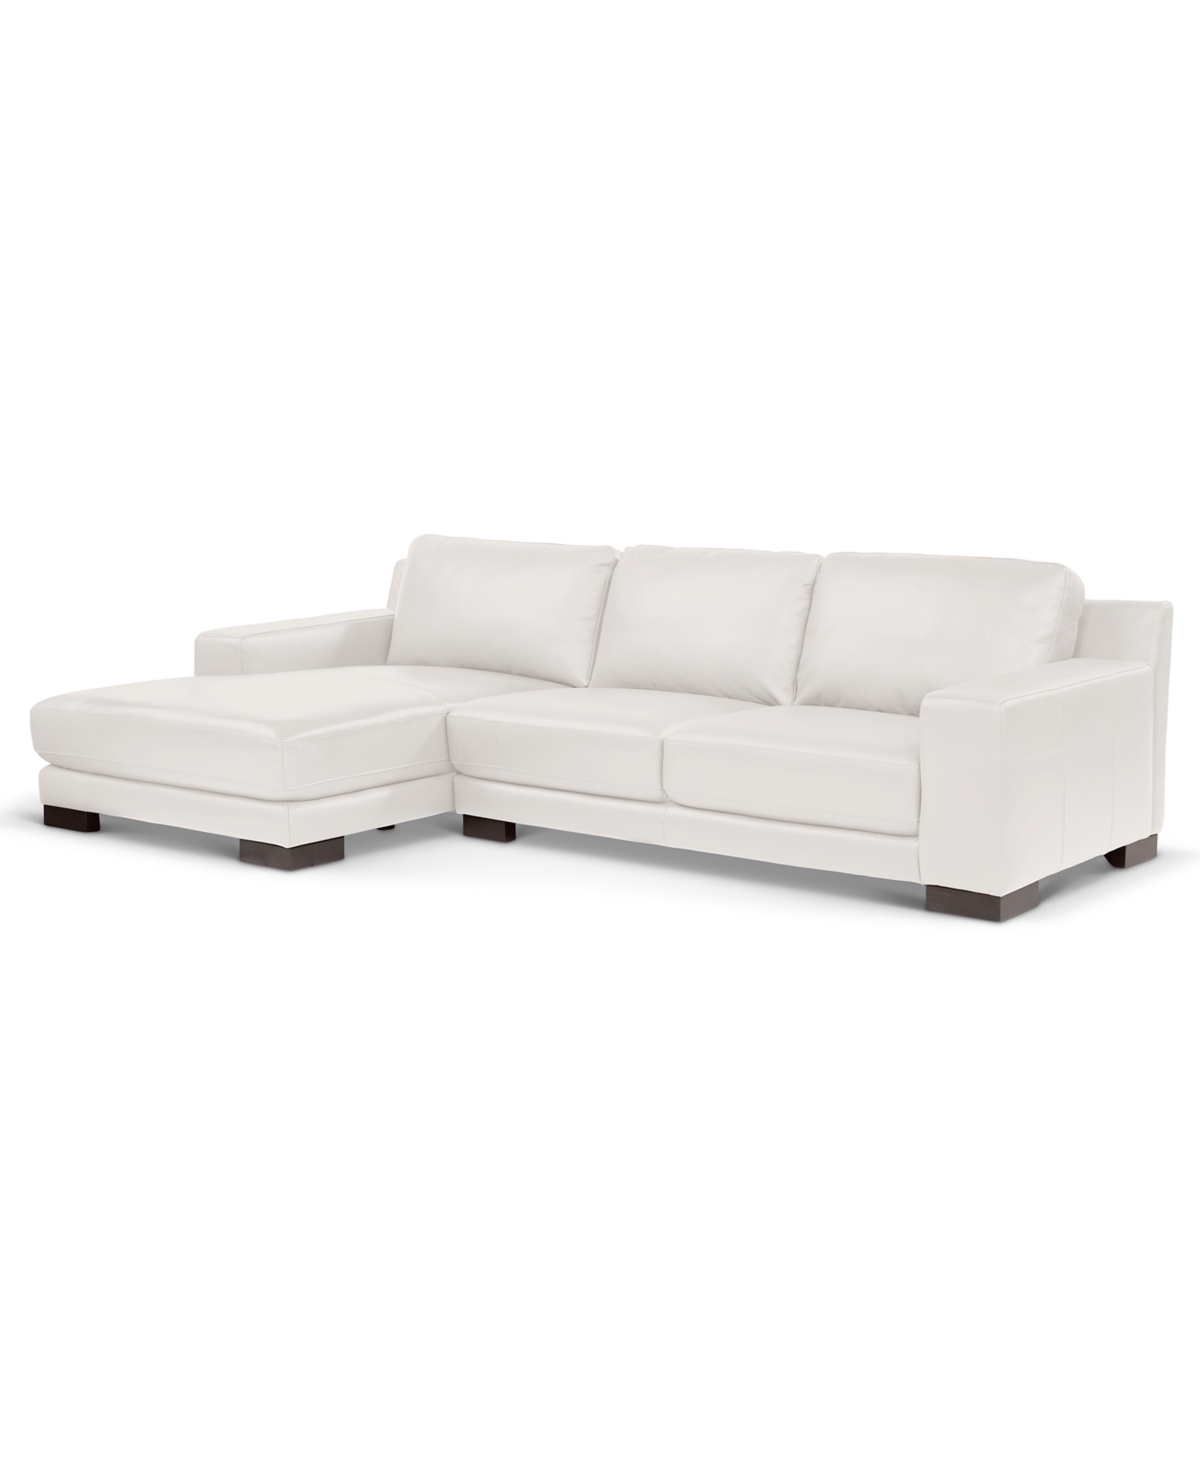 Macy's Darrium 2-pc. Leather Sofa With Chaise, Created For  In White